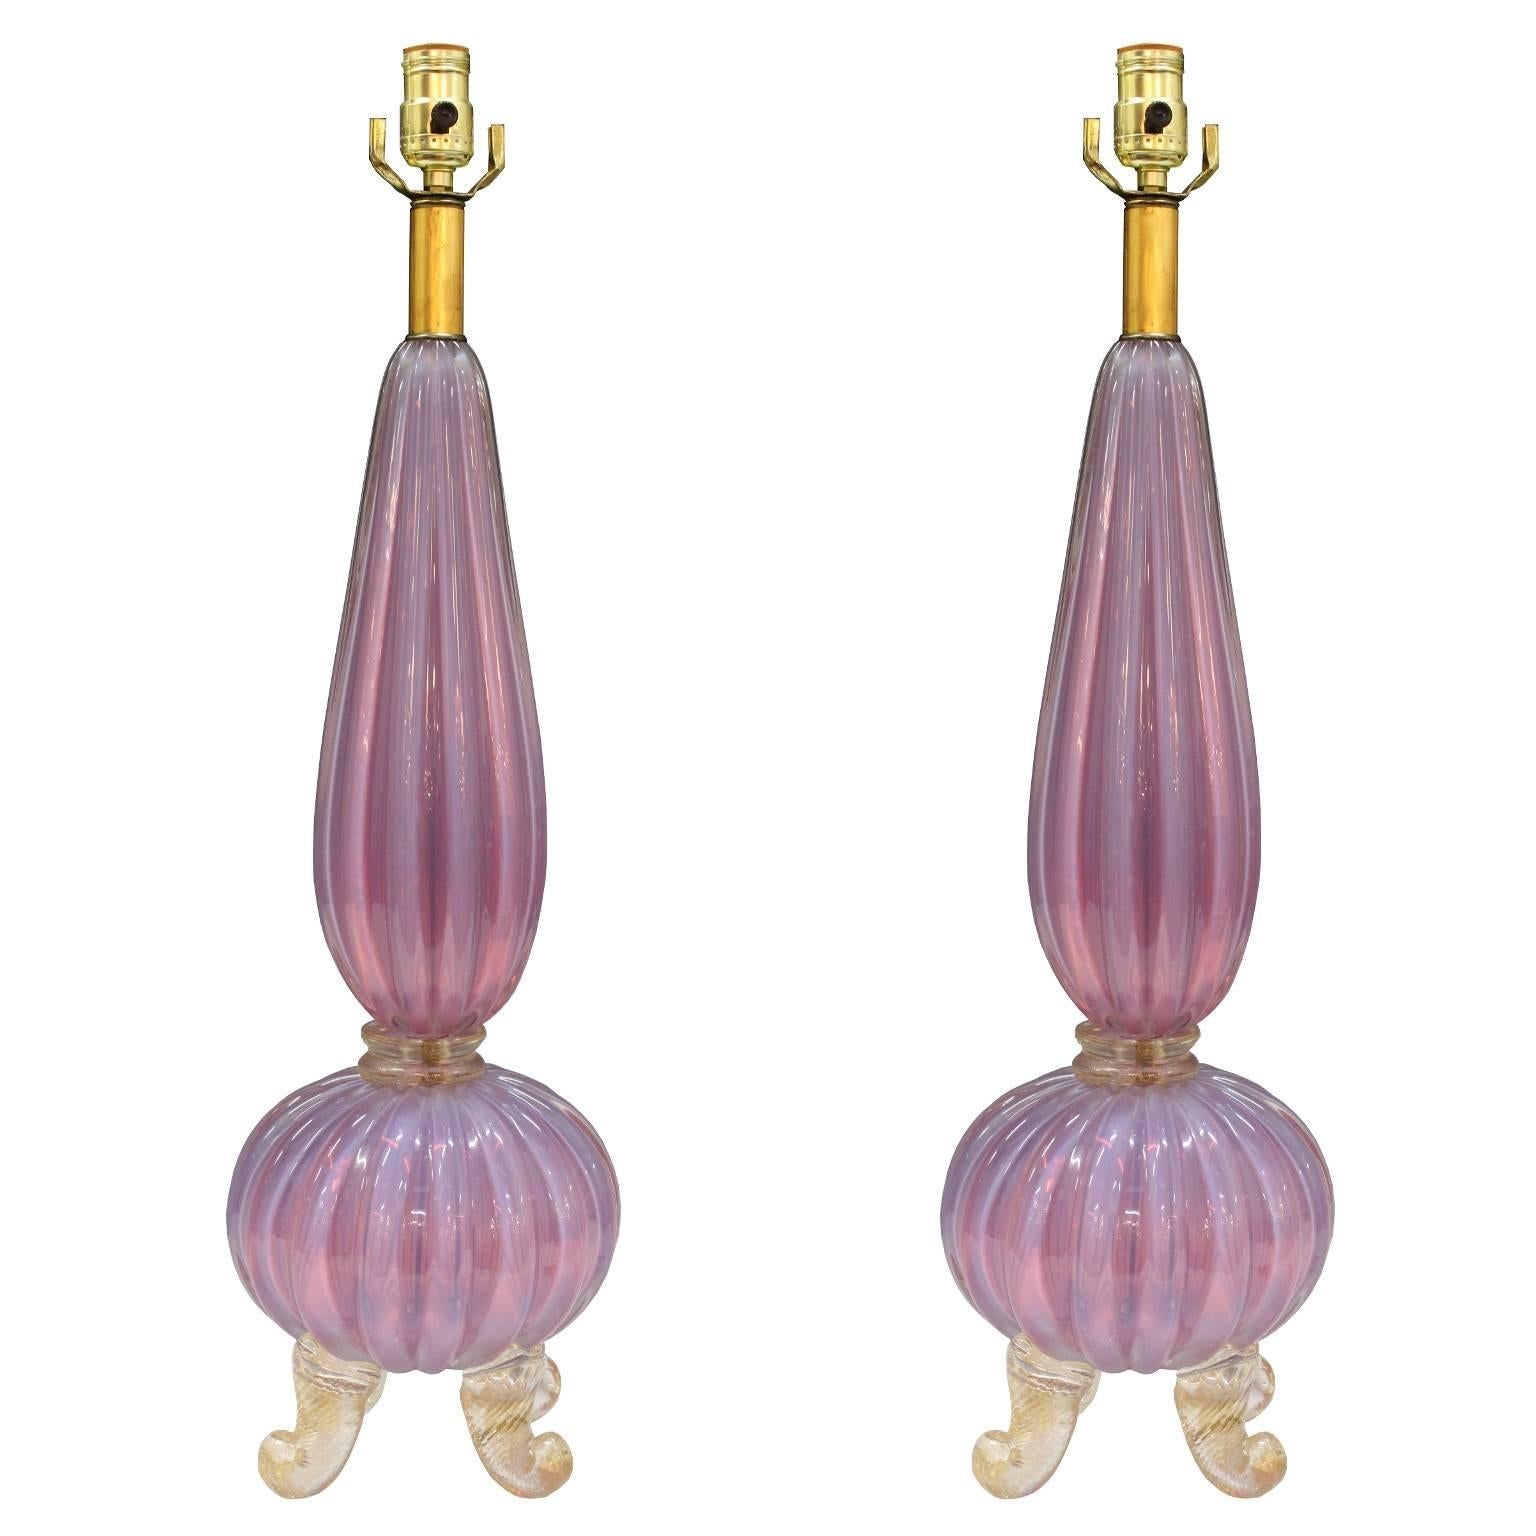 Pair of Archimede Seguso Lilac Opaline Murano Glass Lamps on Scroll Feet